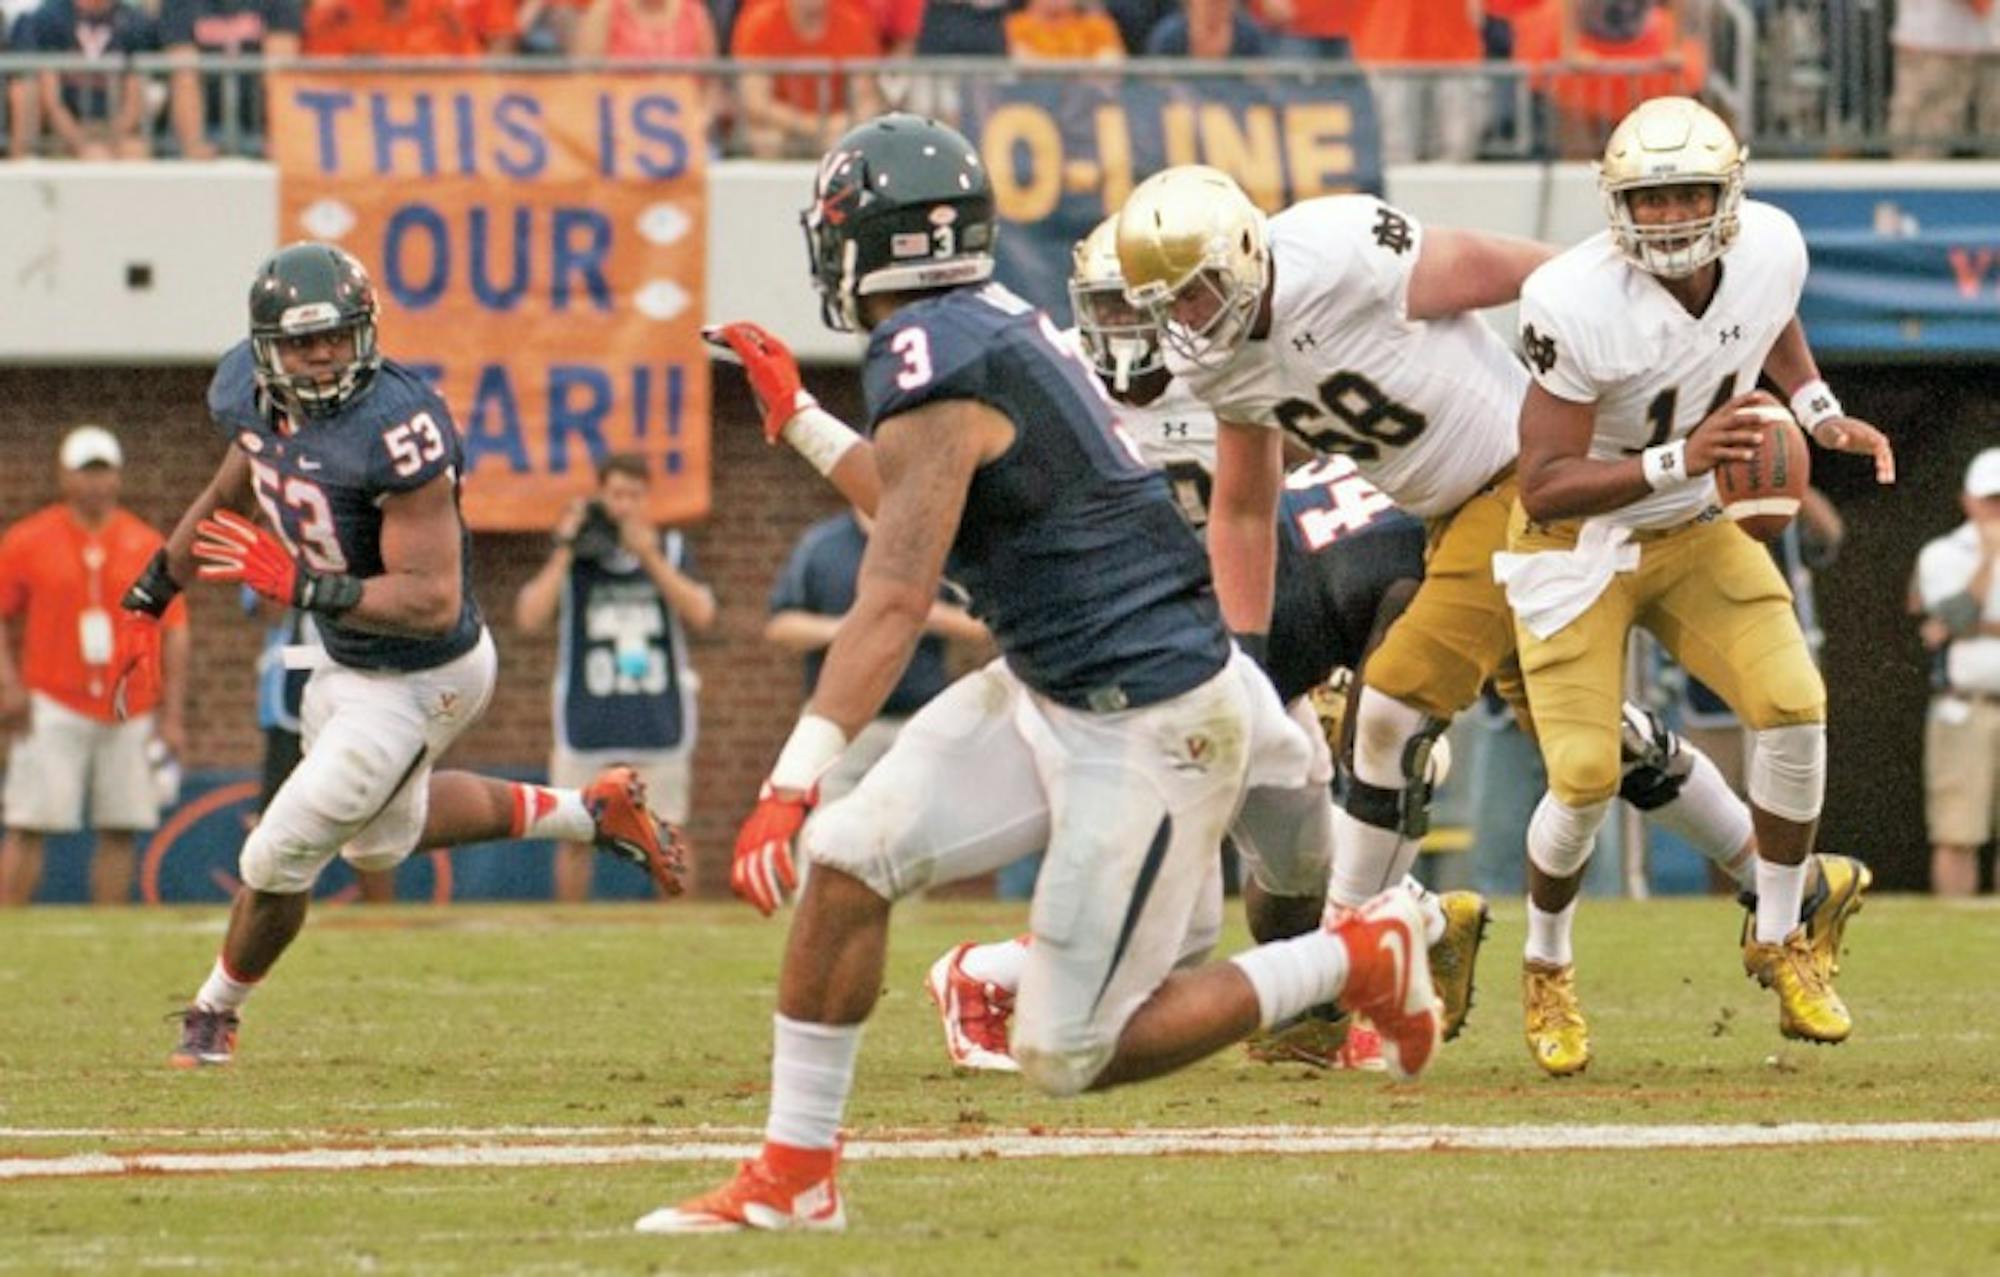 Irish junior quarterback DeShone Kizer scrambles during Notre Dame’s 34-27 win at Virginia on Sept. 12. After entering for the injured Malik Zaire, Kizer beat Virginia, then went 8-3 as a starter the rest of the way.